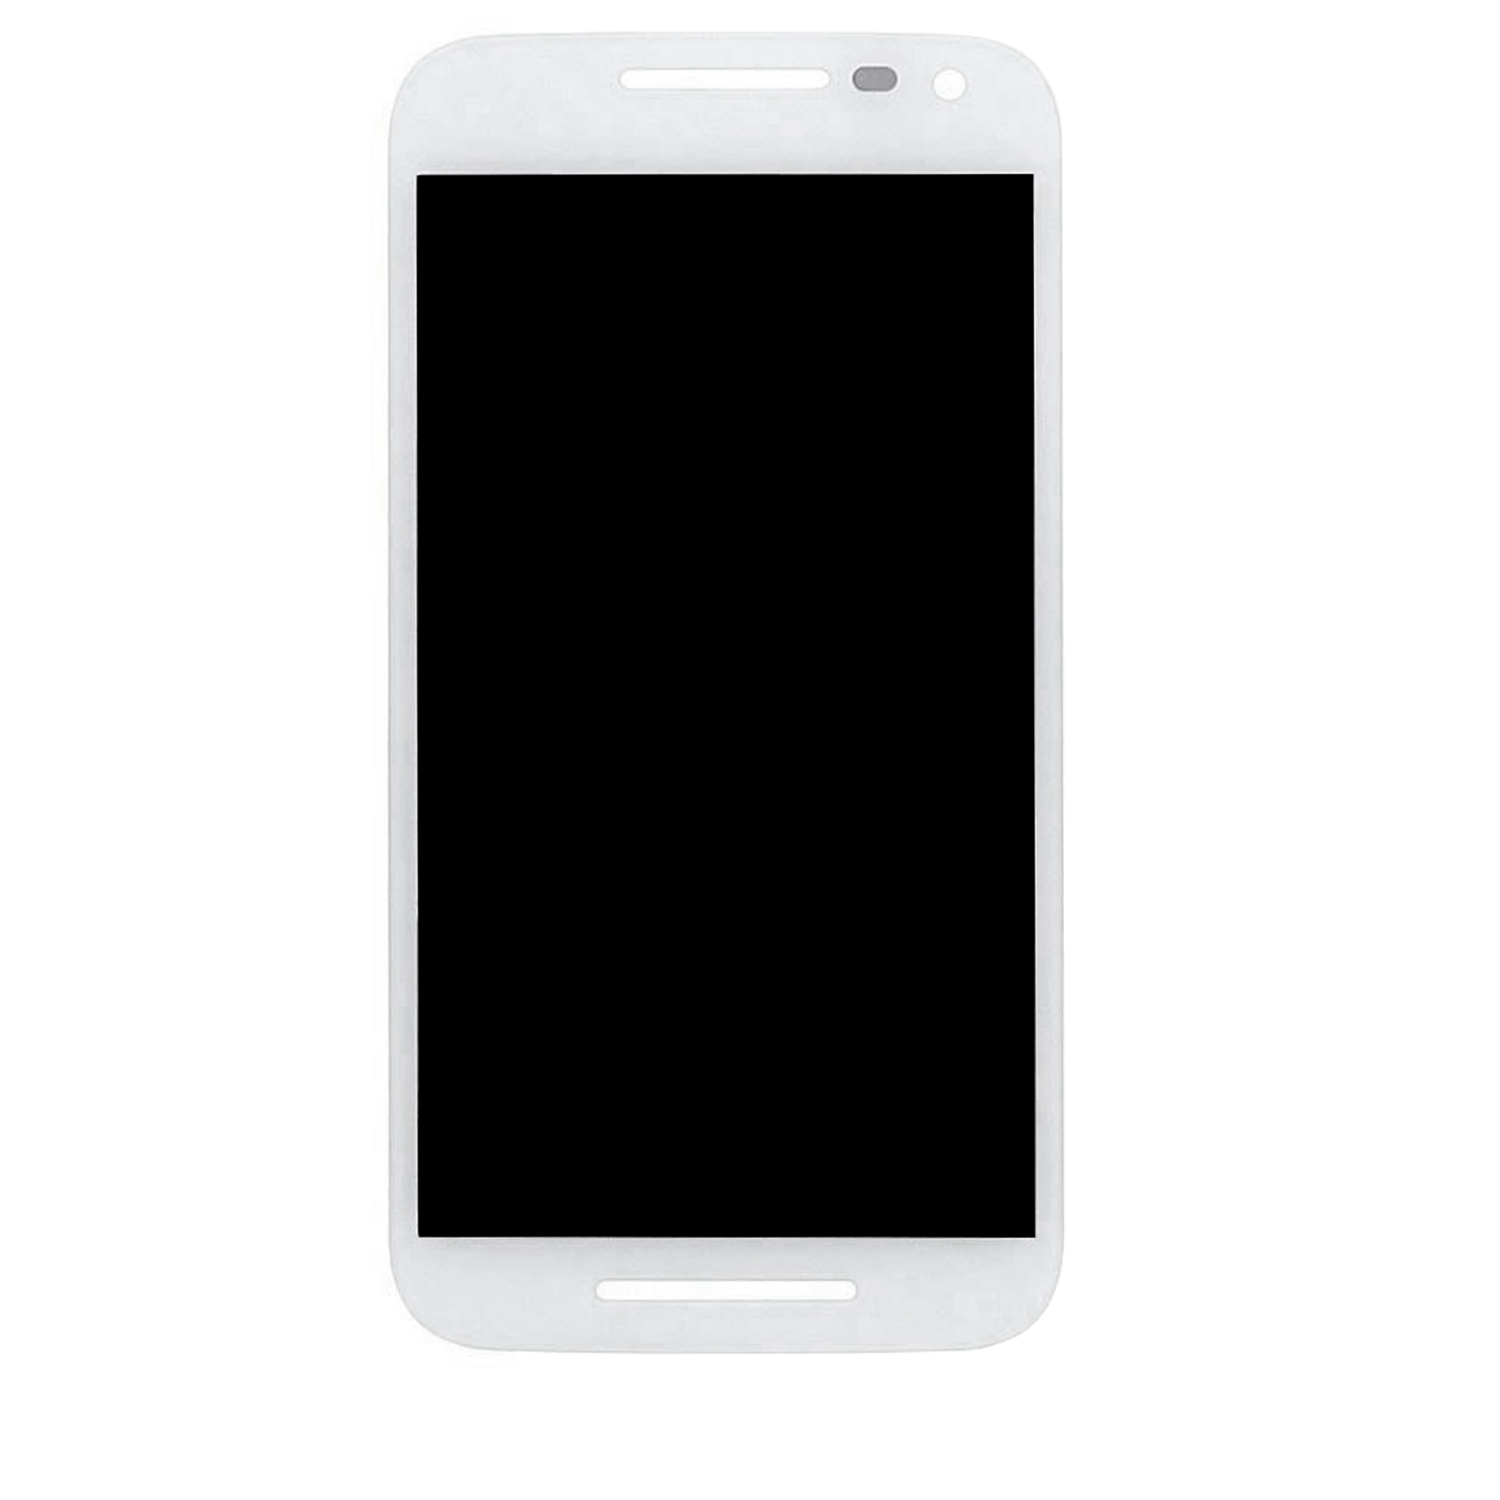 Refurbished (Excellent) - Replacement LCD Assembly Without Frame Compatible For Motorola Moto G3 (XT1540 / XT1543 / XT1548 / 2015) (White)